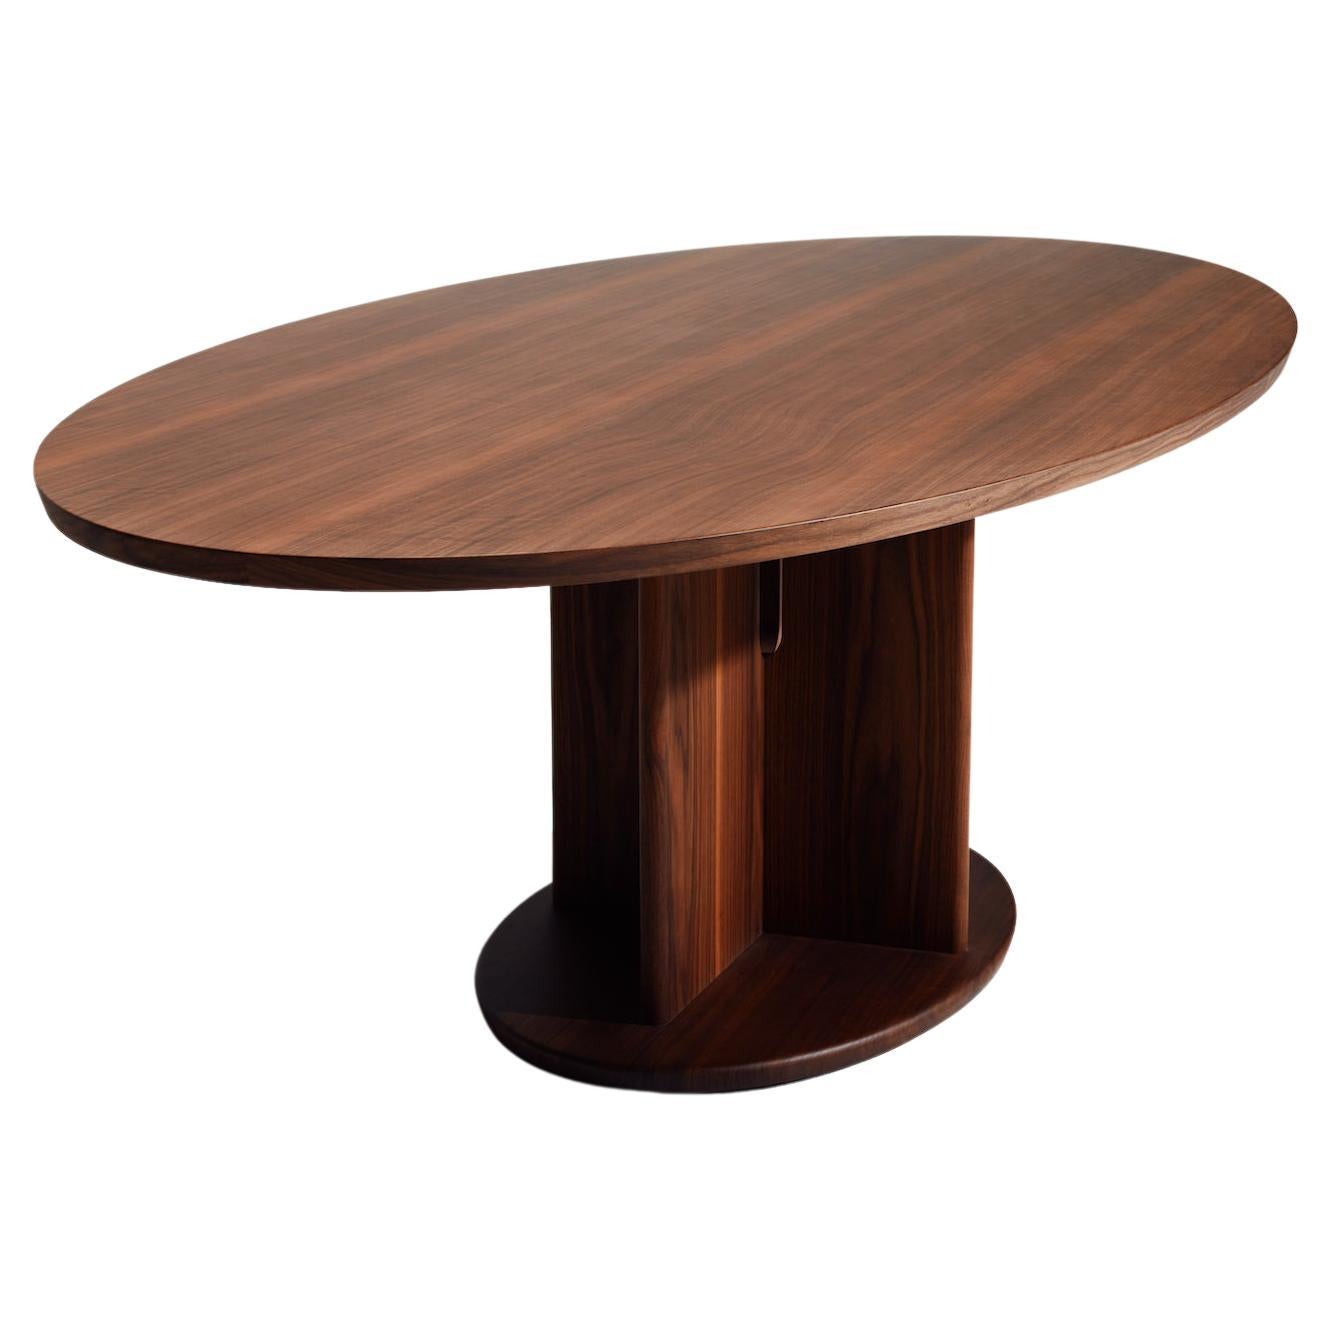 La Manufacture-Paris Intersection Canaletto Walnut Oval Table by Neri & Hu For Sale